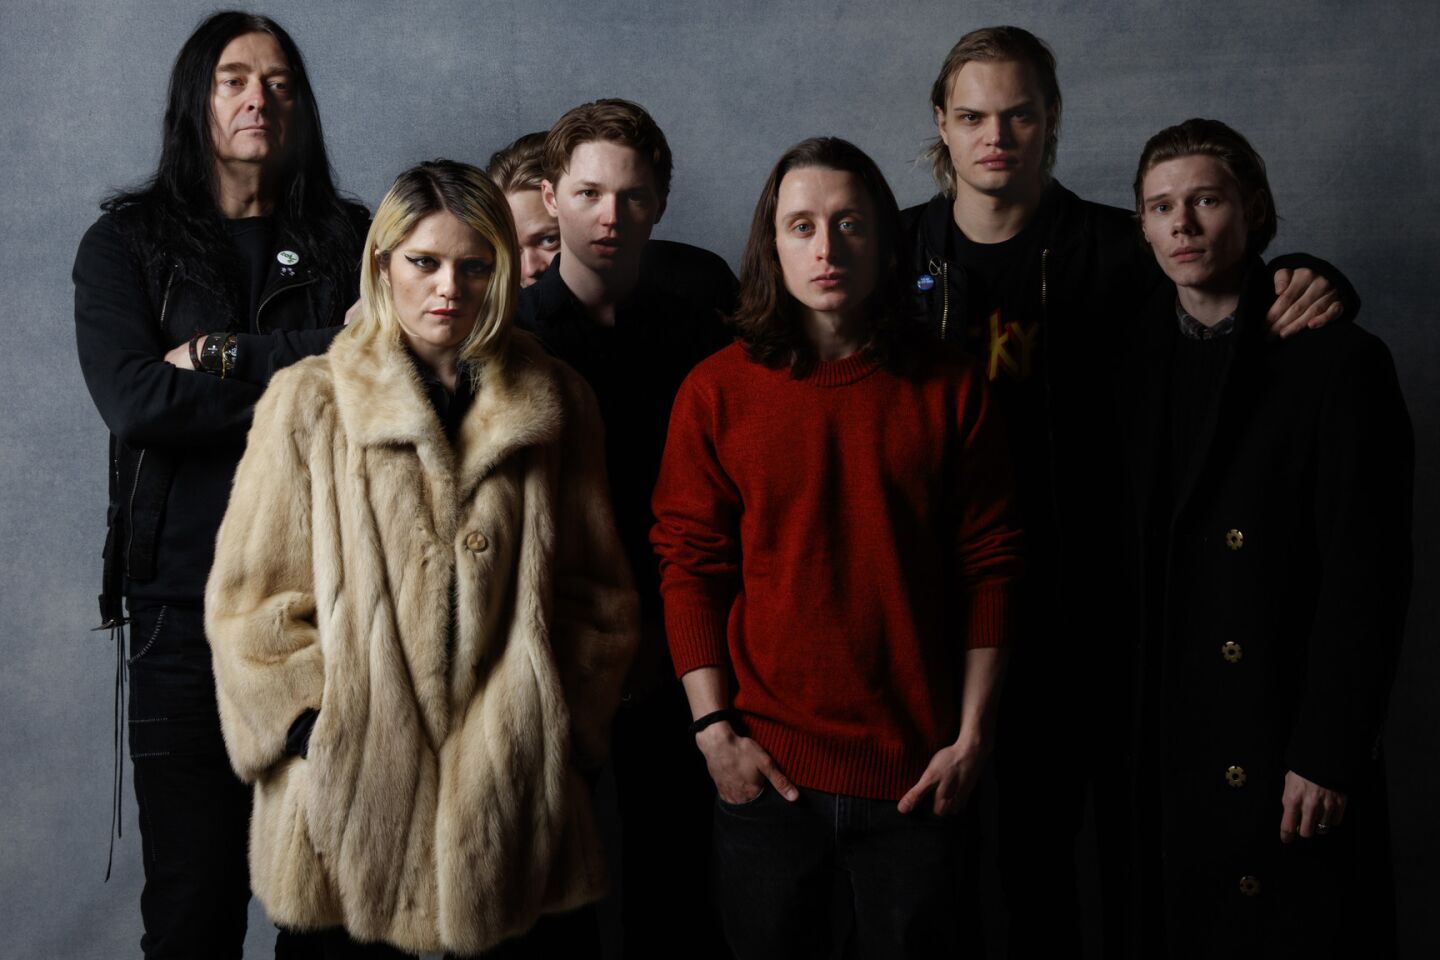 Director Jonas Akerlund, from left, actress Sky Ferreira, actor Valter Skarsgard, actor Jack Kilmer, actor Rory Culkin, actor Wilson Gonzalez and actor Lucian Charles Collier, from the film "Lords of Chaos."